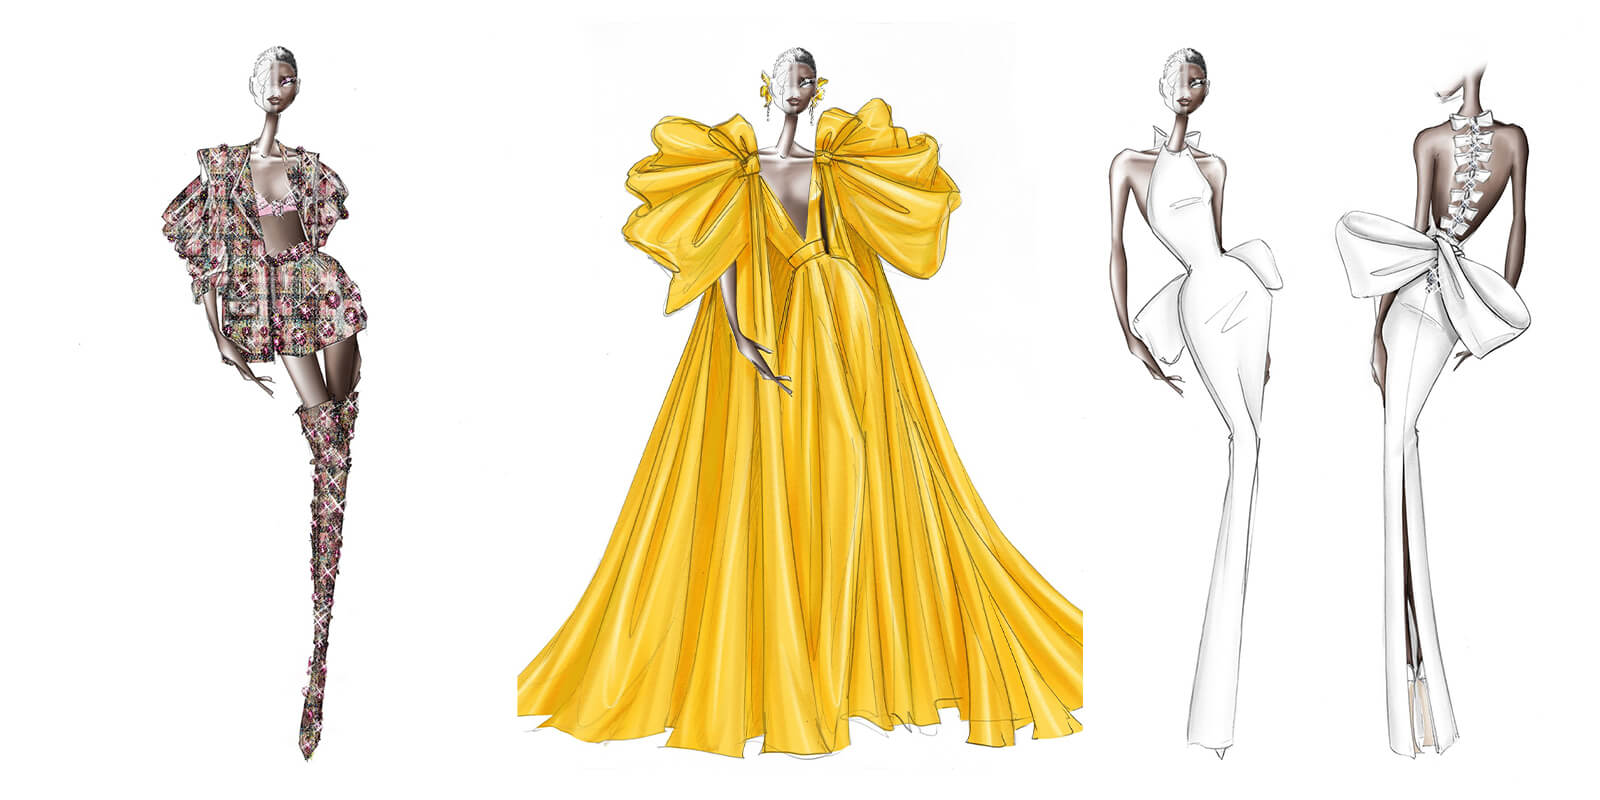 Ralph & Russo sketches